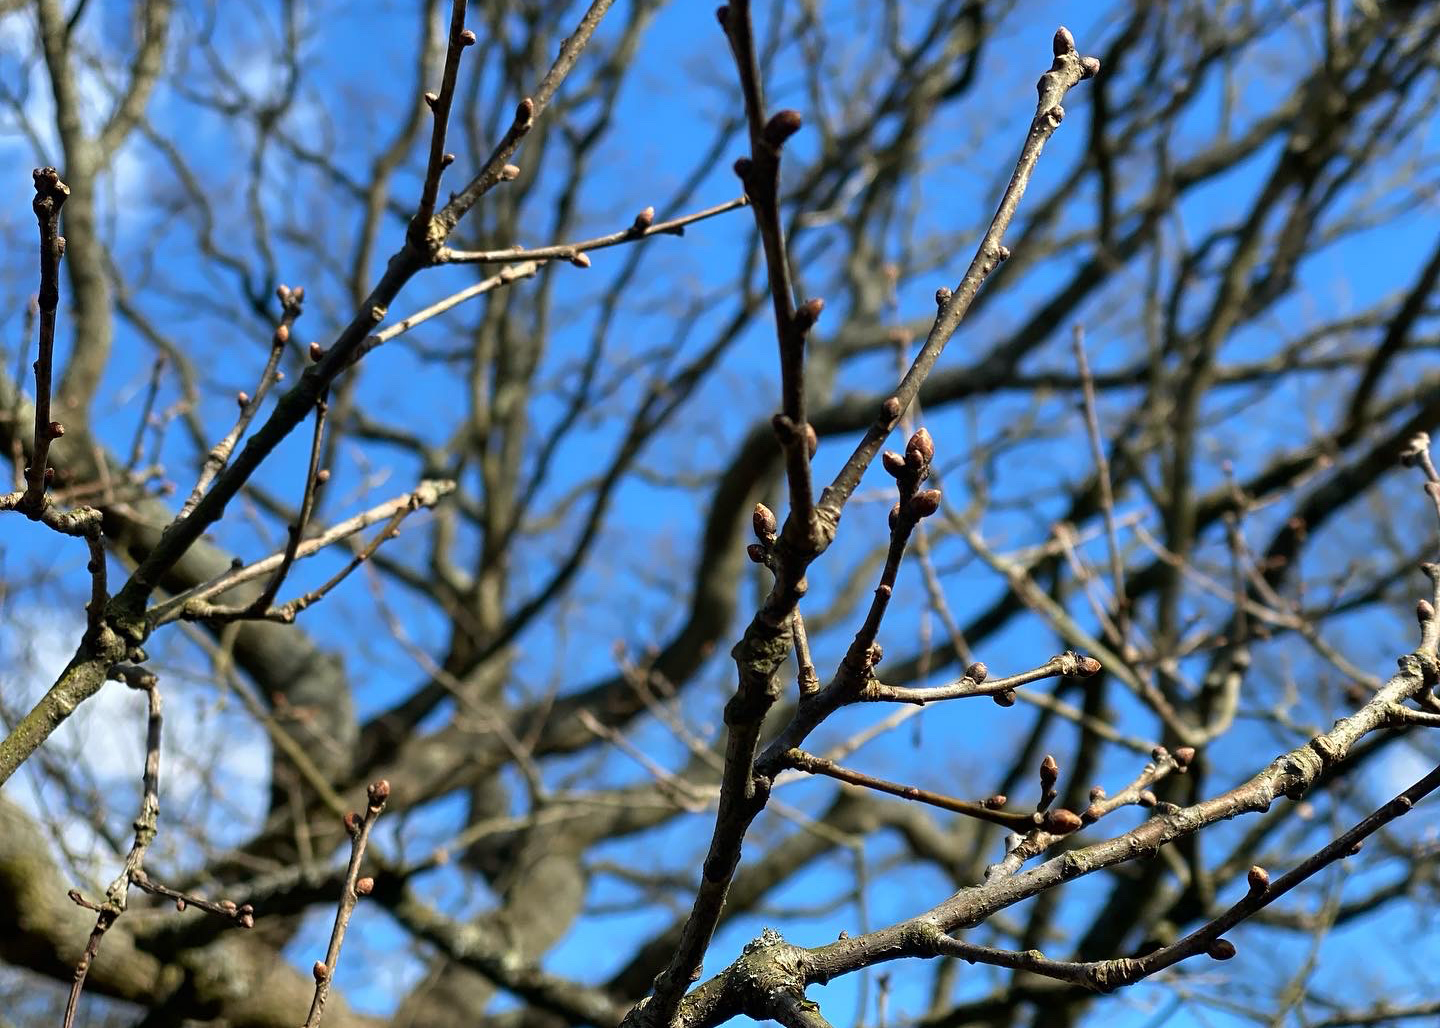 Close up view of a few early buds starting to form on some branches